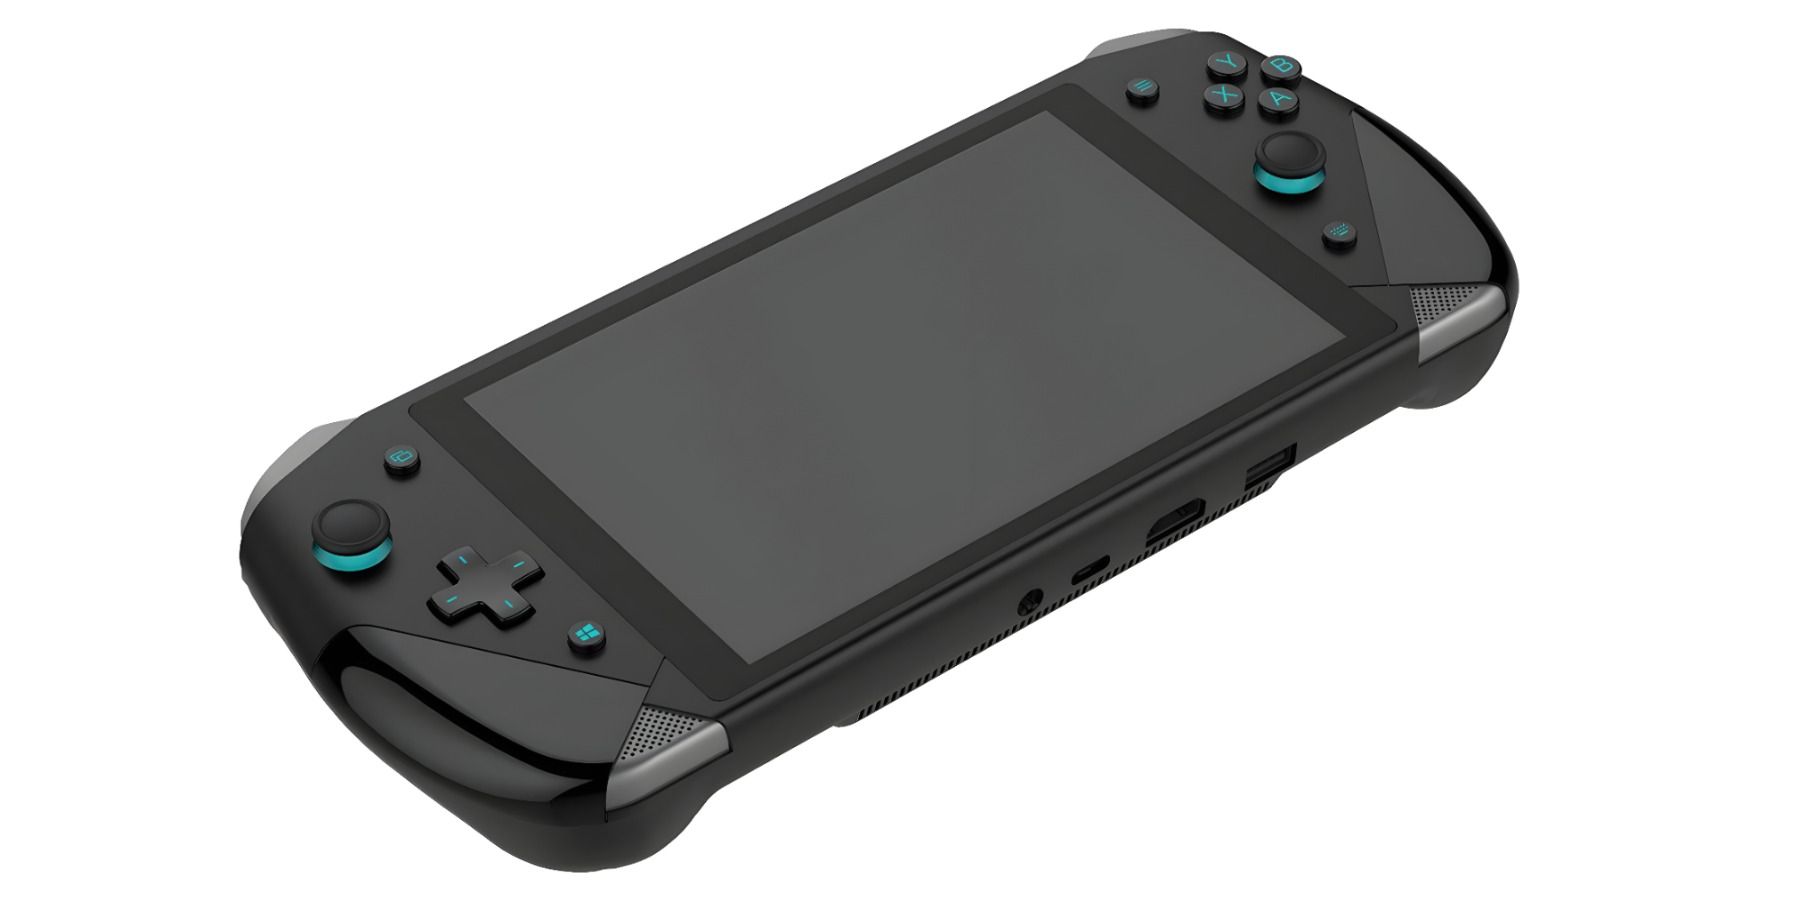 Tencent-PC-Console-Gaming-Handheld-Official-Mockup